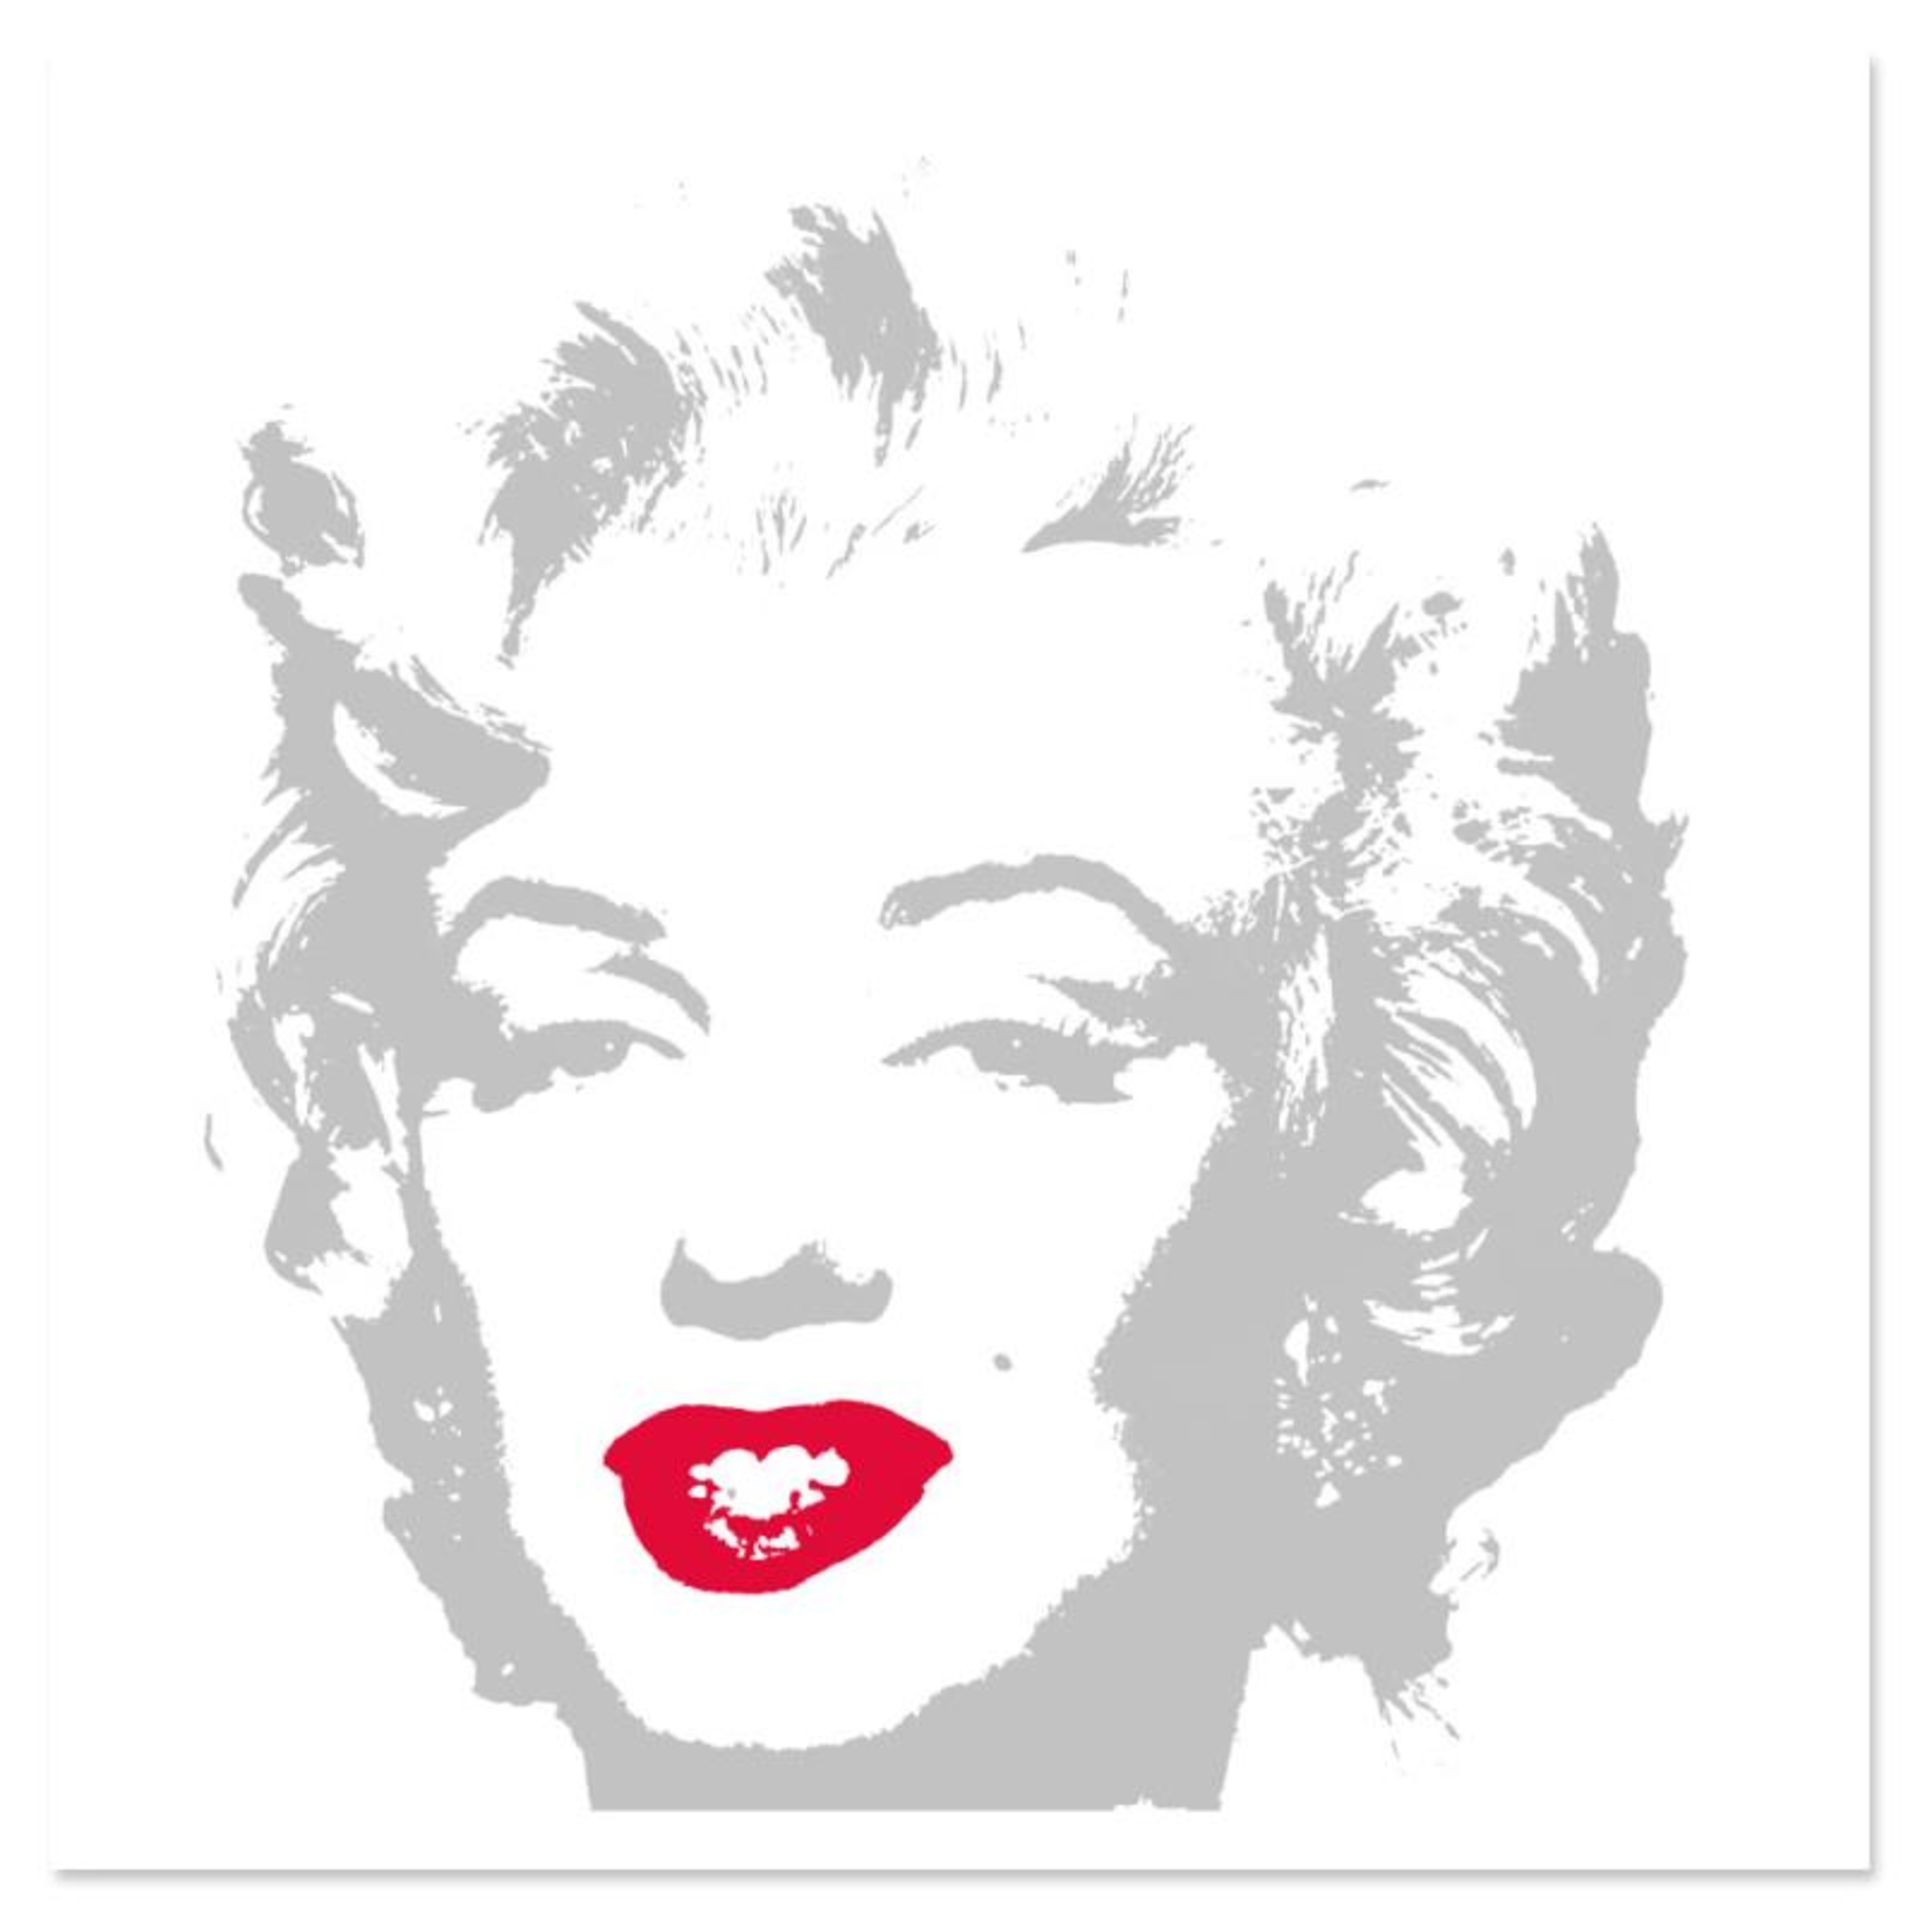 Andy Warhol "Golden Marilyn 11.35" Limited Edition Silk Screen Print from Sunday